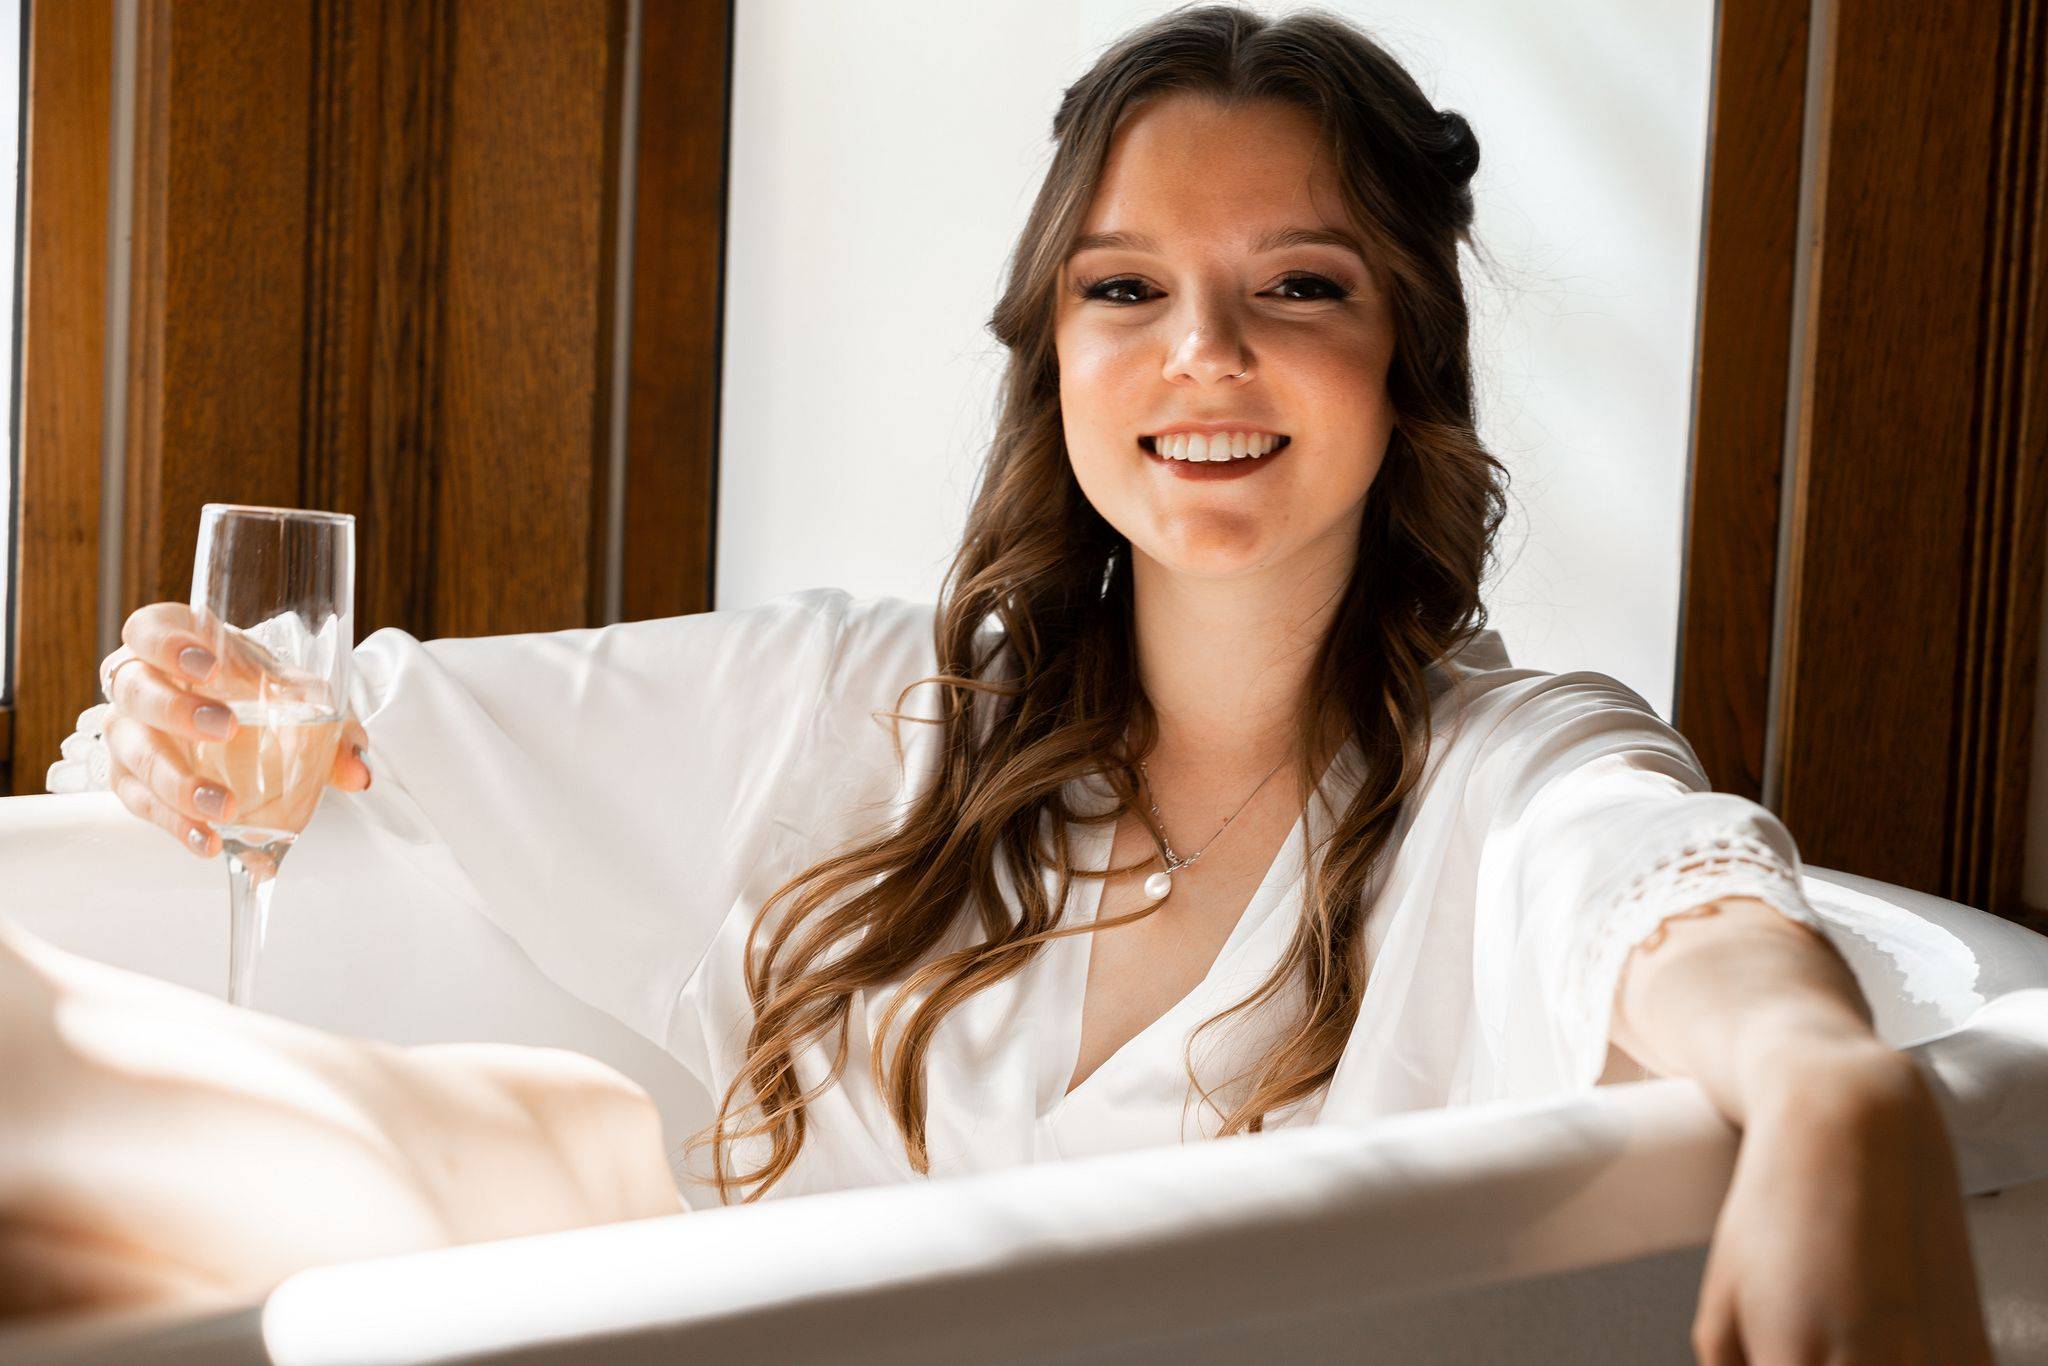 bride with champagne glass and bridesmaid robes sitting in a bath tub.